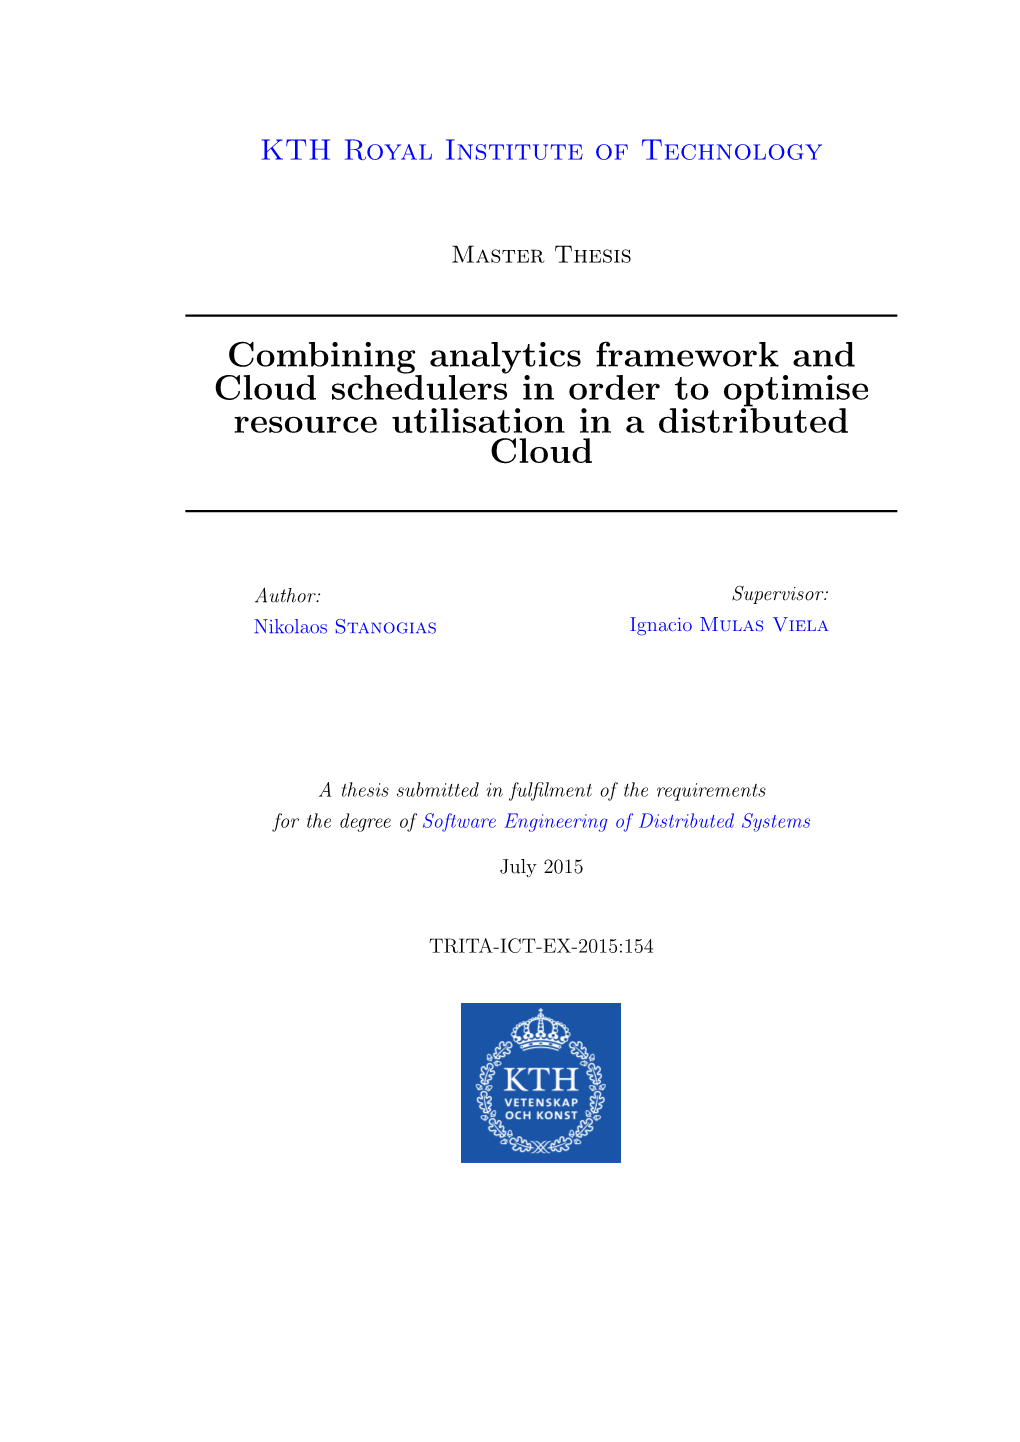 Combining Analytics Framework and Cloud Schedulers in Order to Optimise Resource Utilisation in a Distributed Cloud